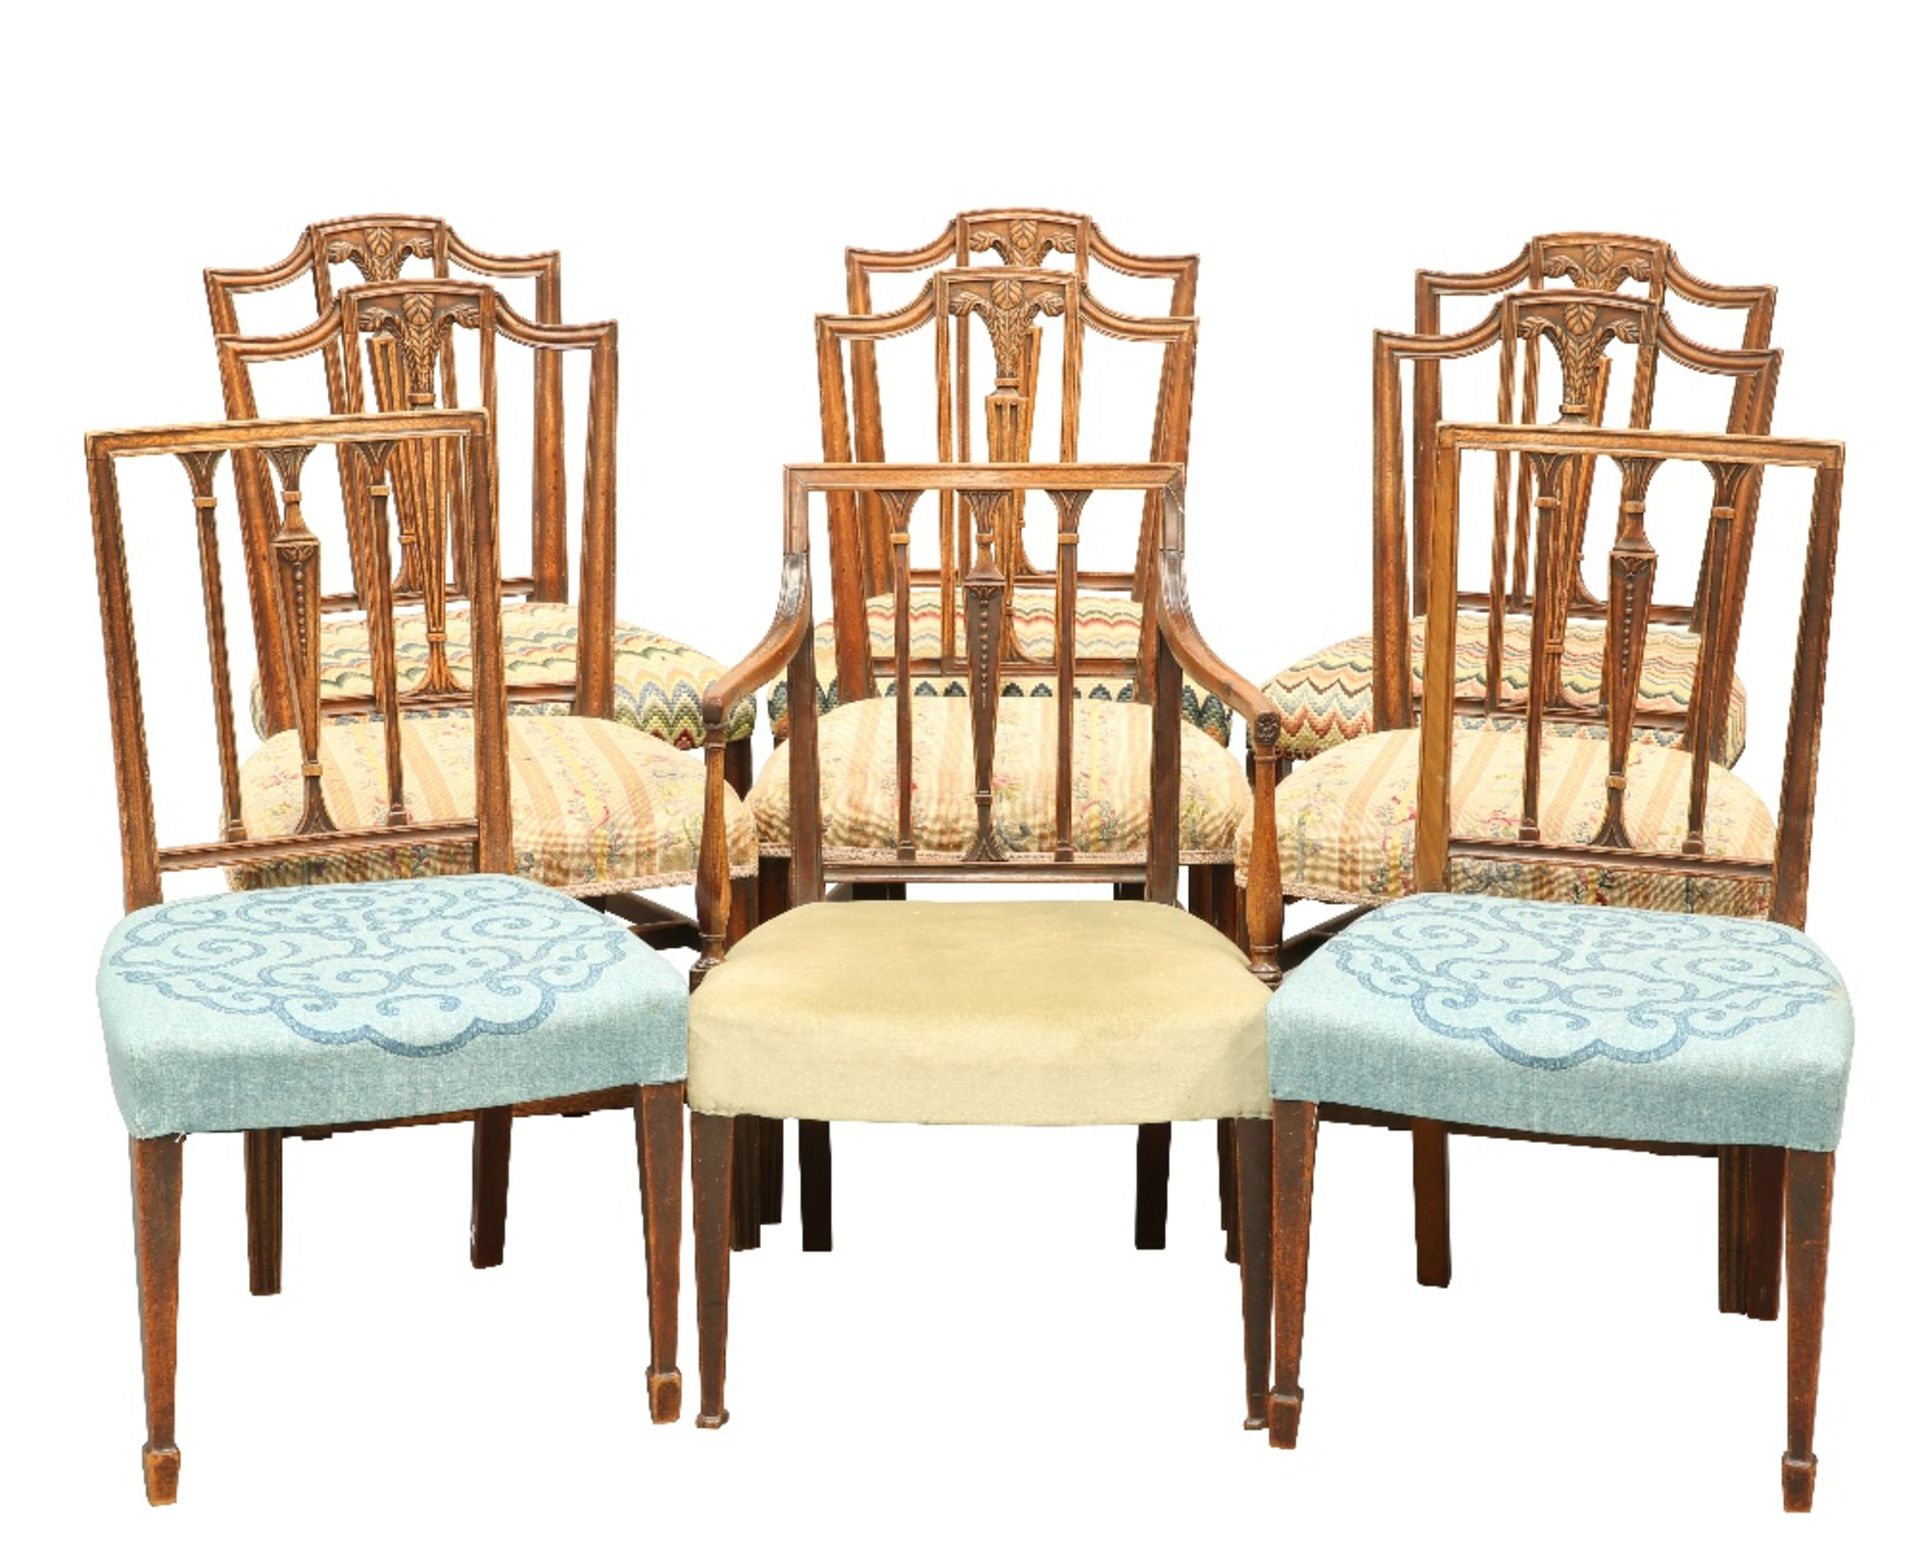 A MATCHED SET OF NINE GEORGE III MAHOGANY DINING CHAIRS